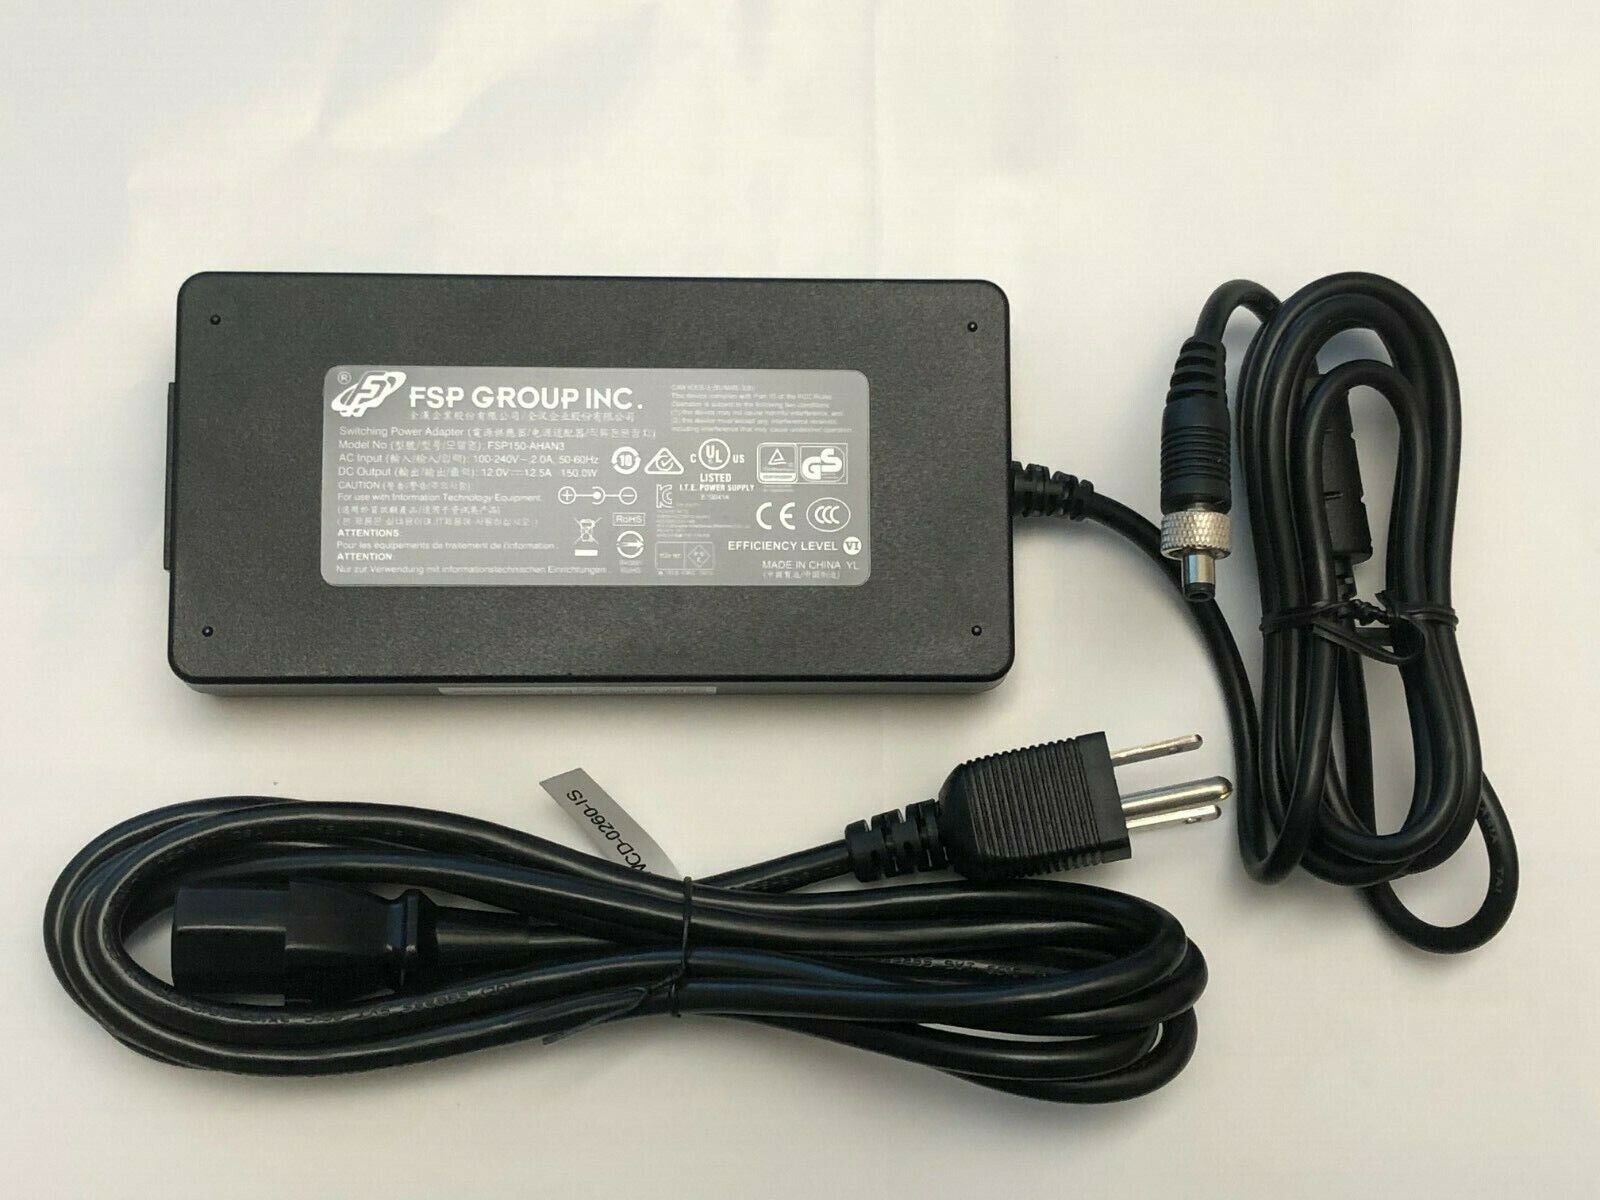 Supermicro MCP-250-10128-0N 150W Lockable Power Adapter with US Power Cord